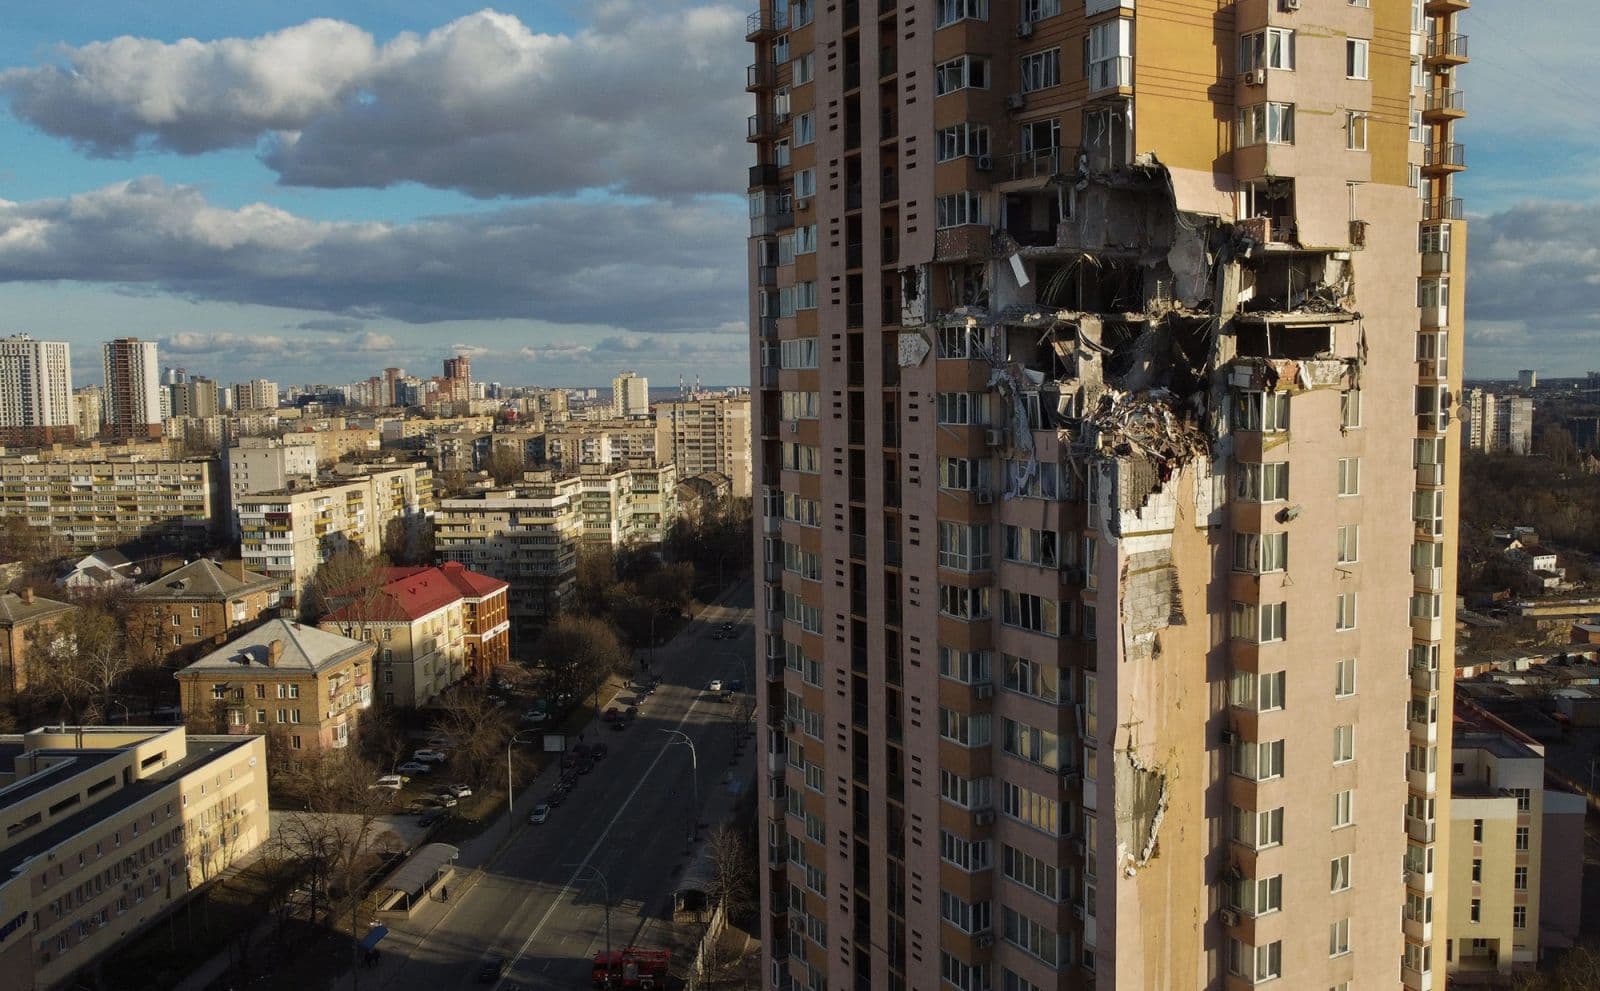 An apartment building in Kyiv is seen after it was damaged by shelling on February 26